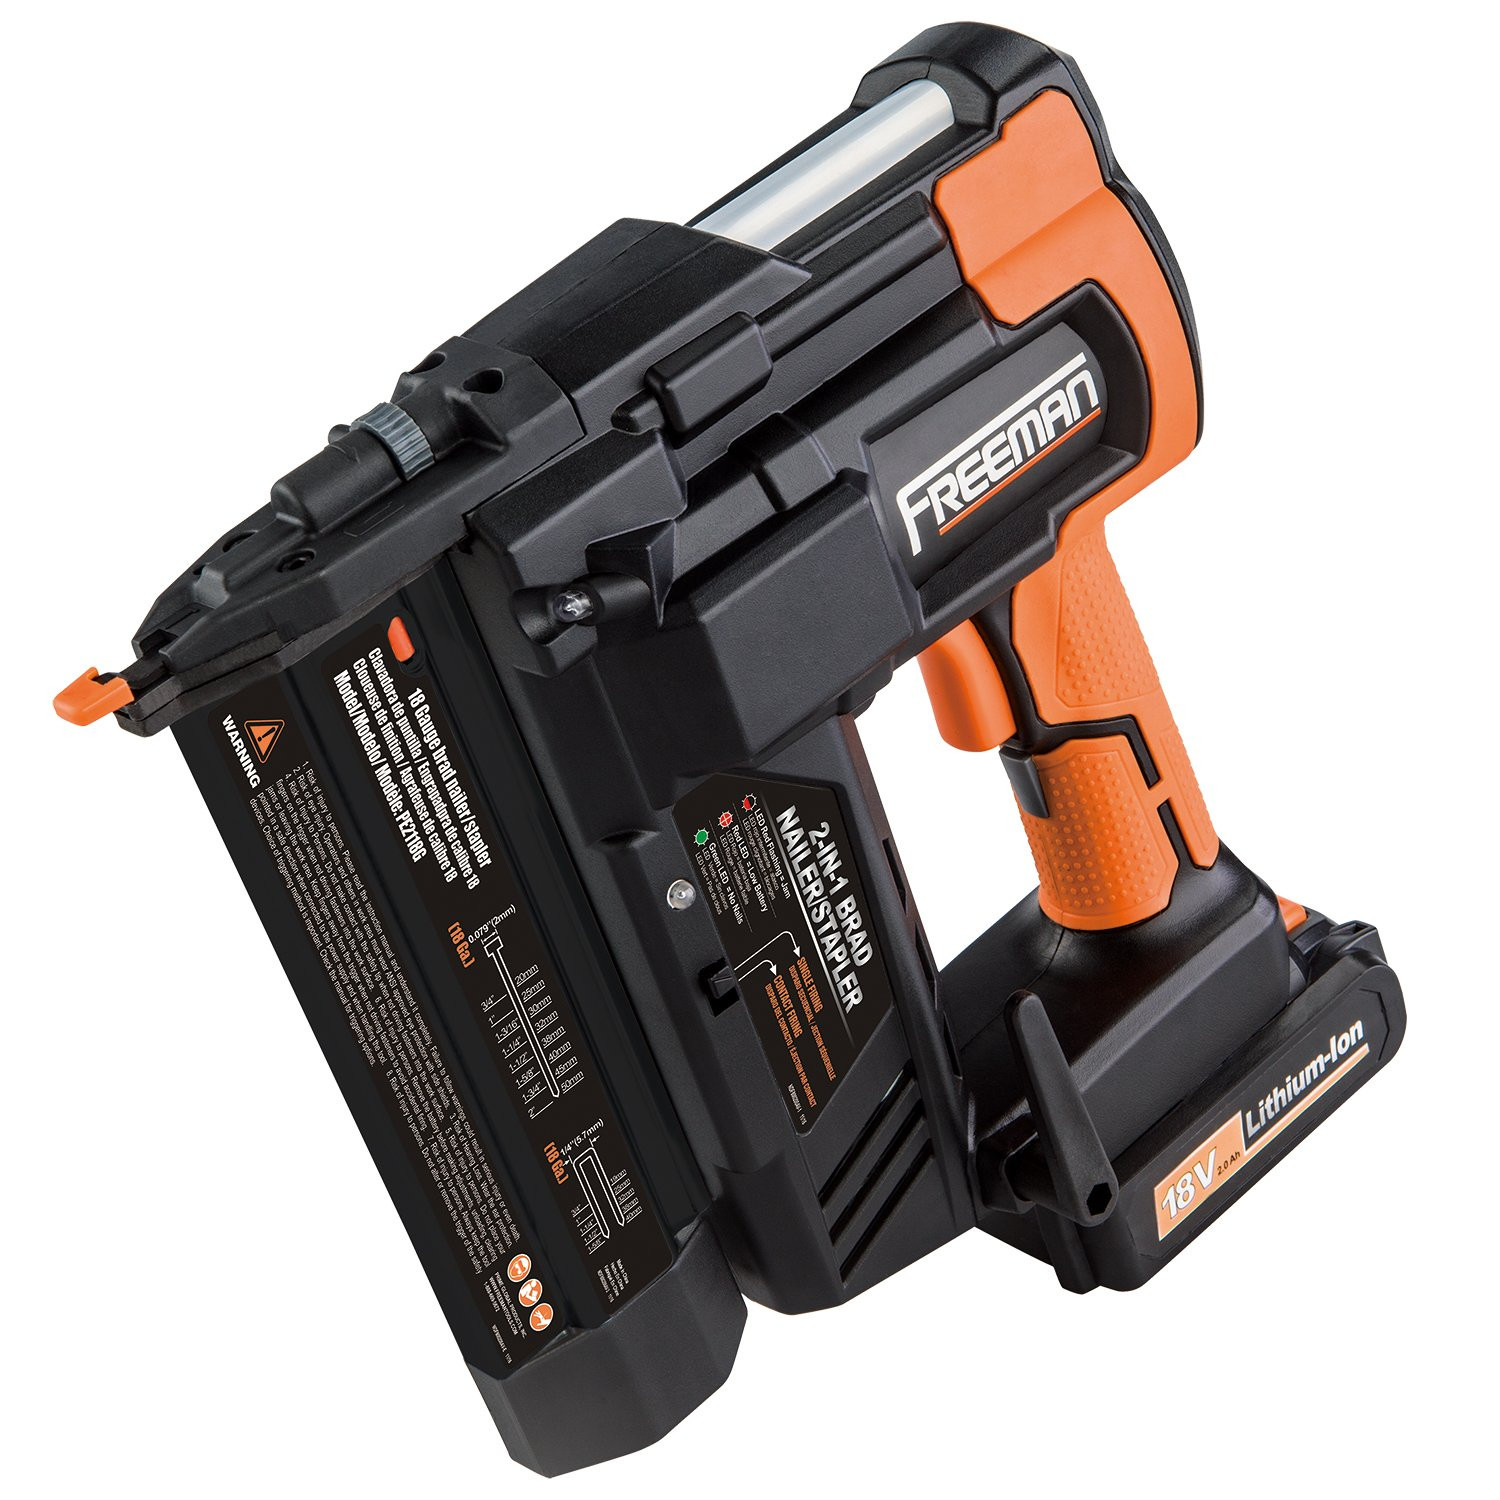 14 Recommended Best Hardwood Floor Nailer Reviews 2024 free download best hardwood floor nailer reviews of best rated in power nailers staplers helpful customer reviews pertaining to freeman pe2118g 18 volt 2 in 1 18 gauge cordless nailer stapler product